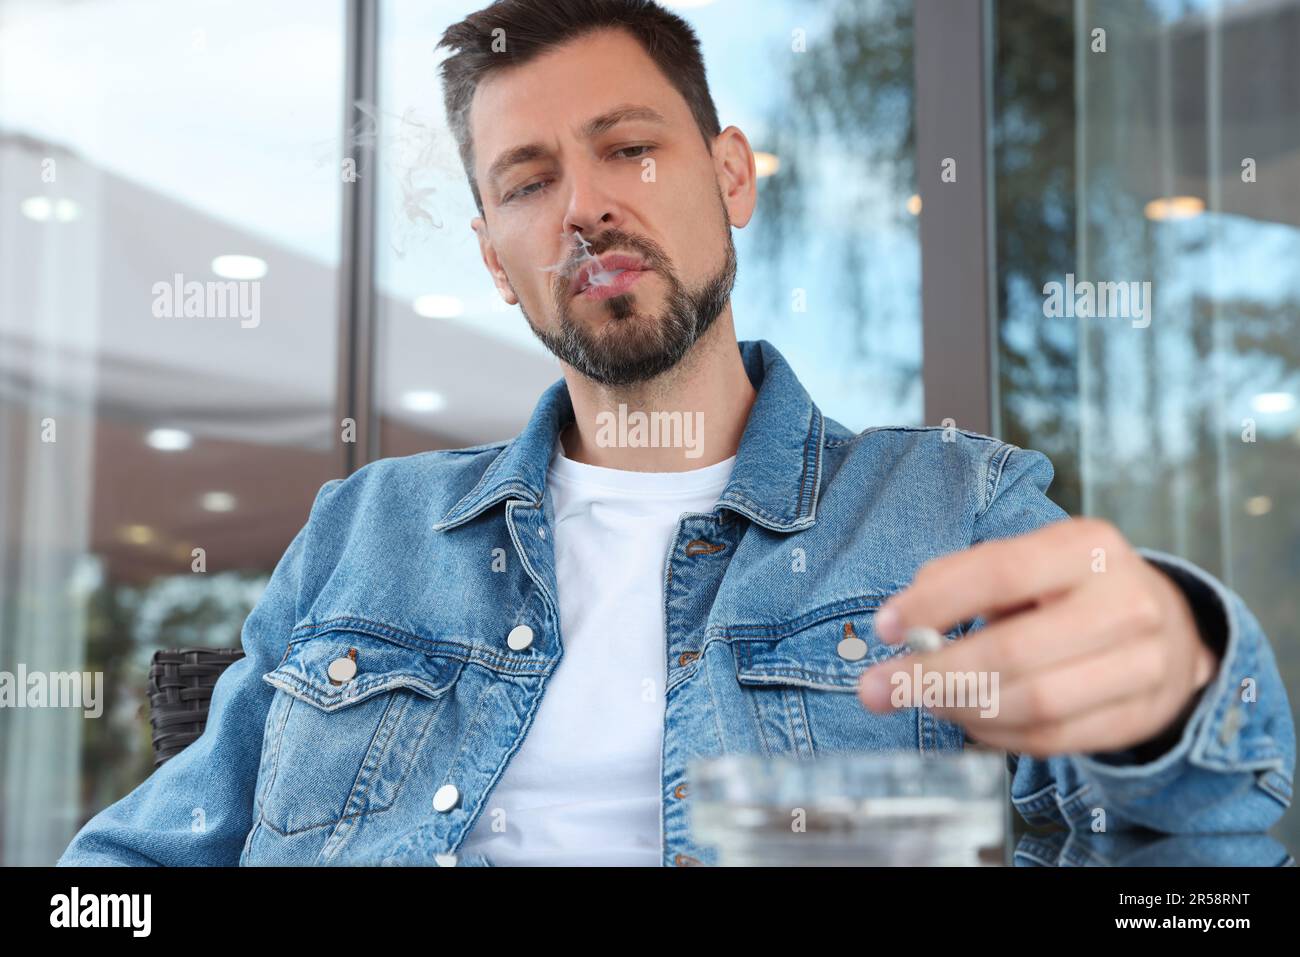 Handsome man smoking cigarette in outdoor cafe Stock Photo